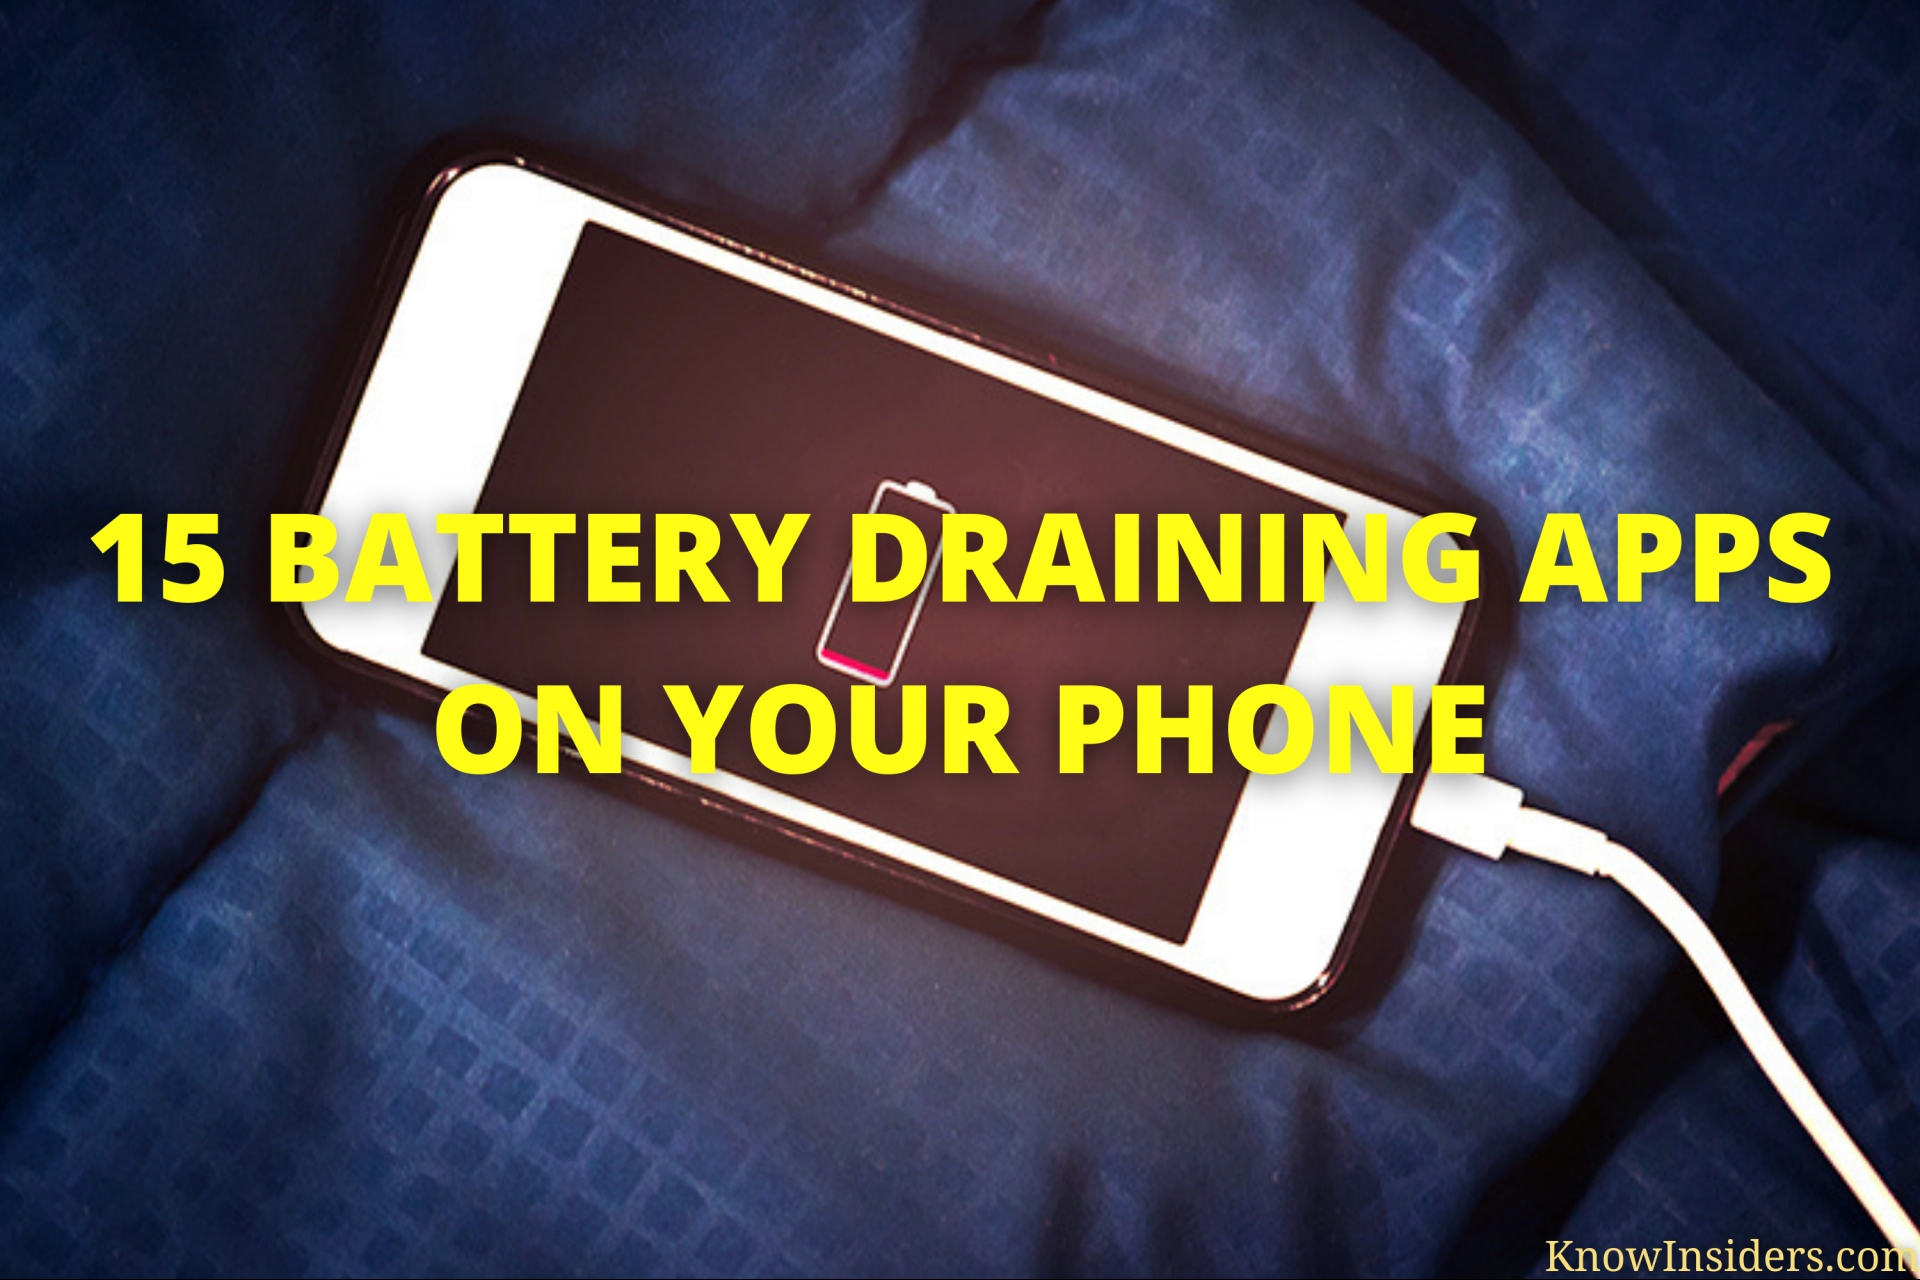 15 Battery Draining Apps You Must Remove from Your Phone